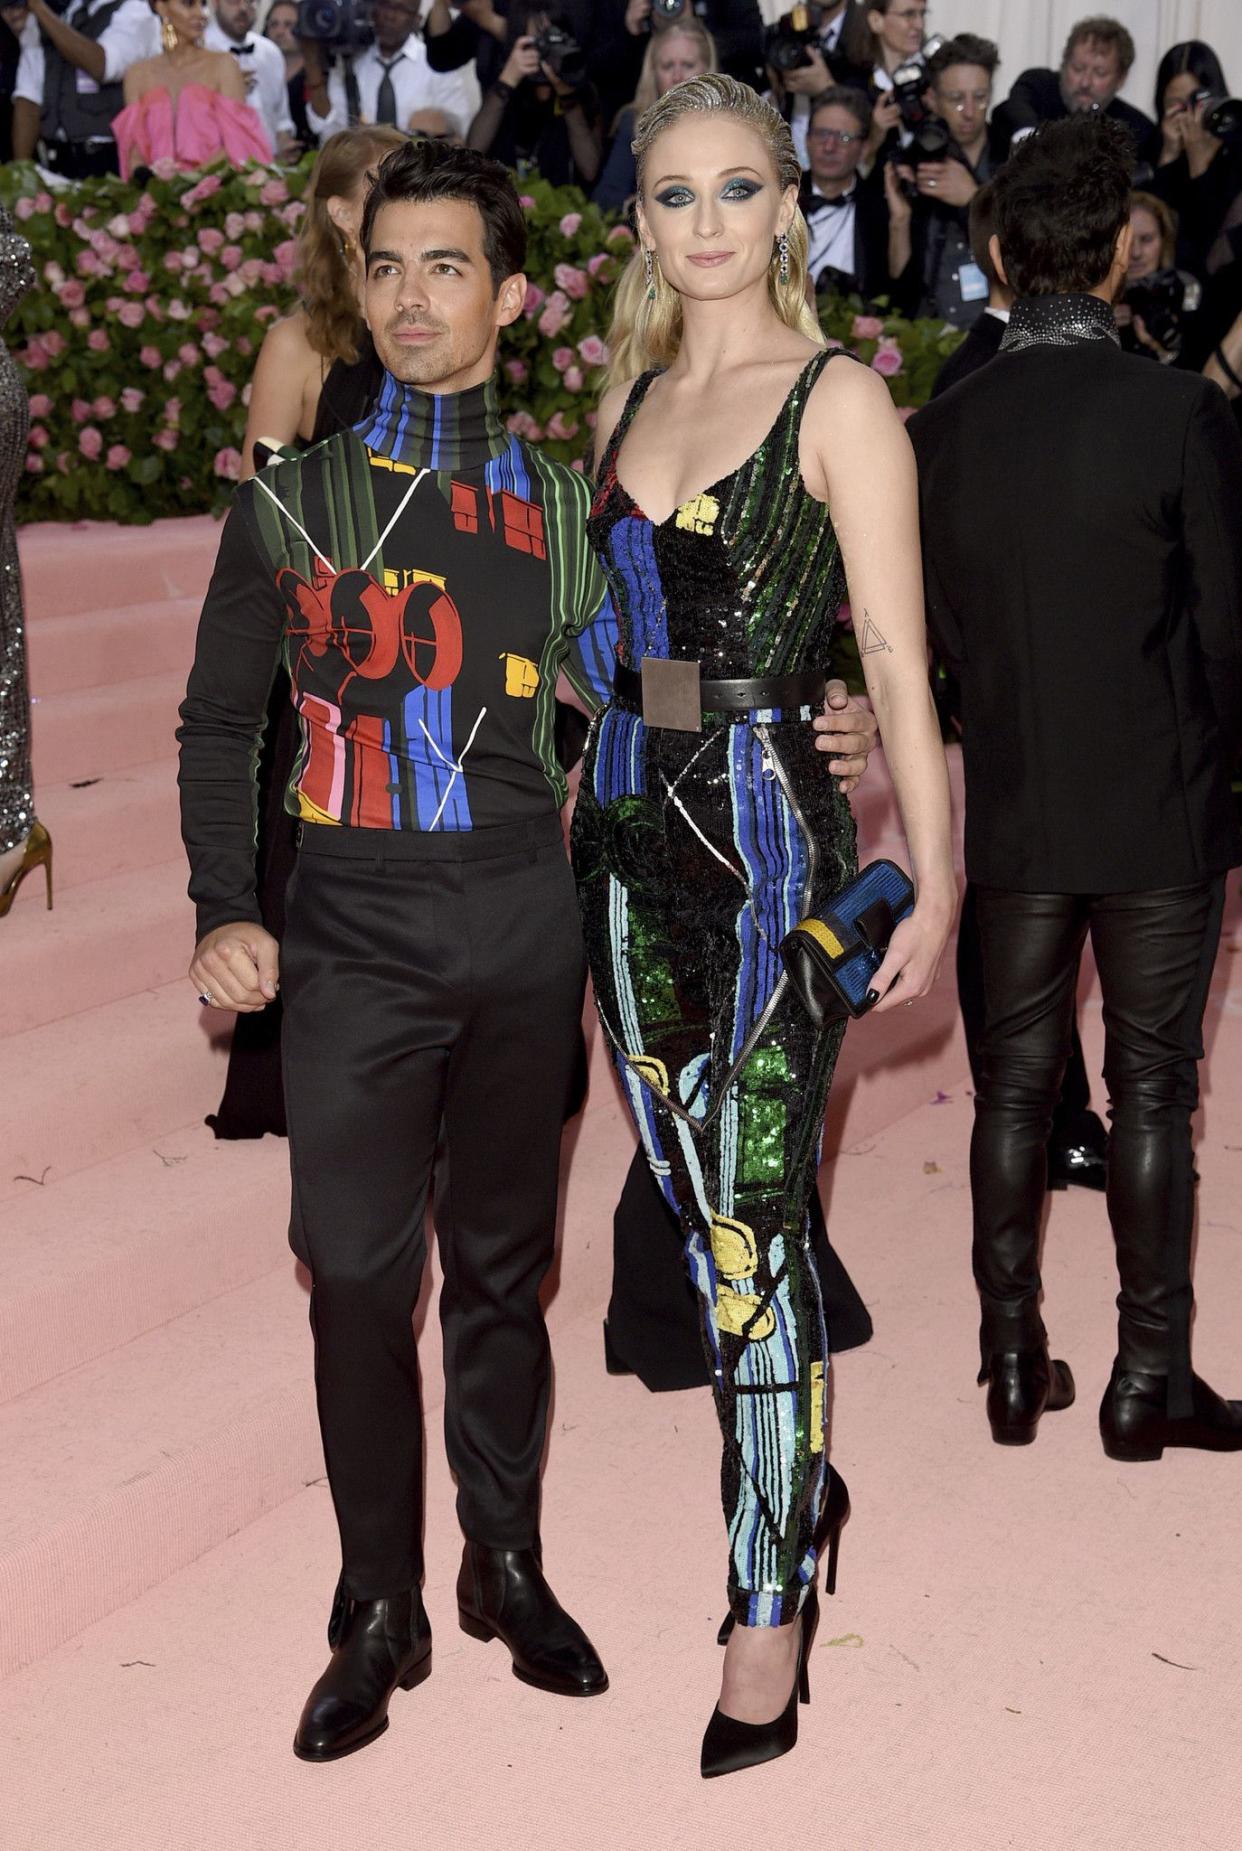 Joe Jonas, left, and Sophie Turner attend The Metropolitan Museum of Art's Costume Institute benefit gala celebrating the opening of the "Camp: Notes on Fashion" exhibition on Monday, May 6, 2019, in New York.